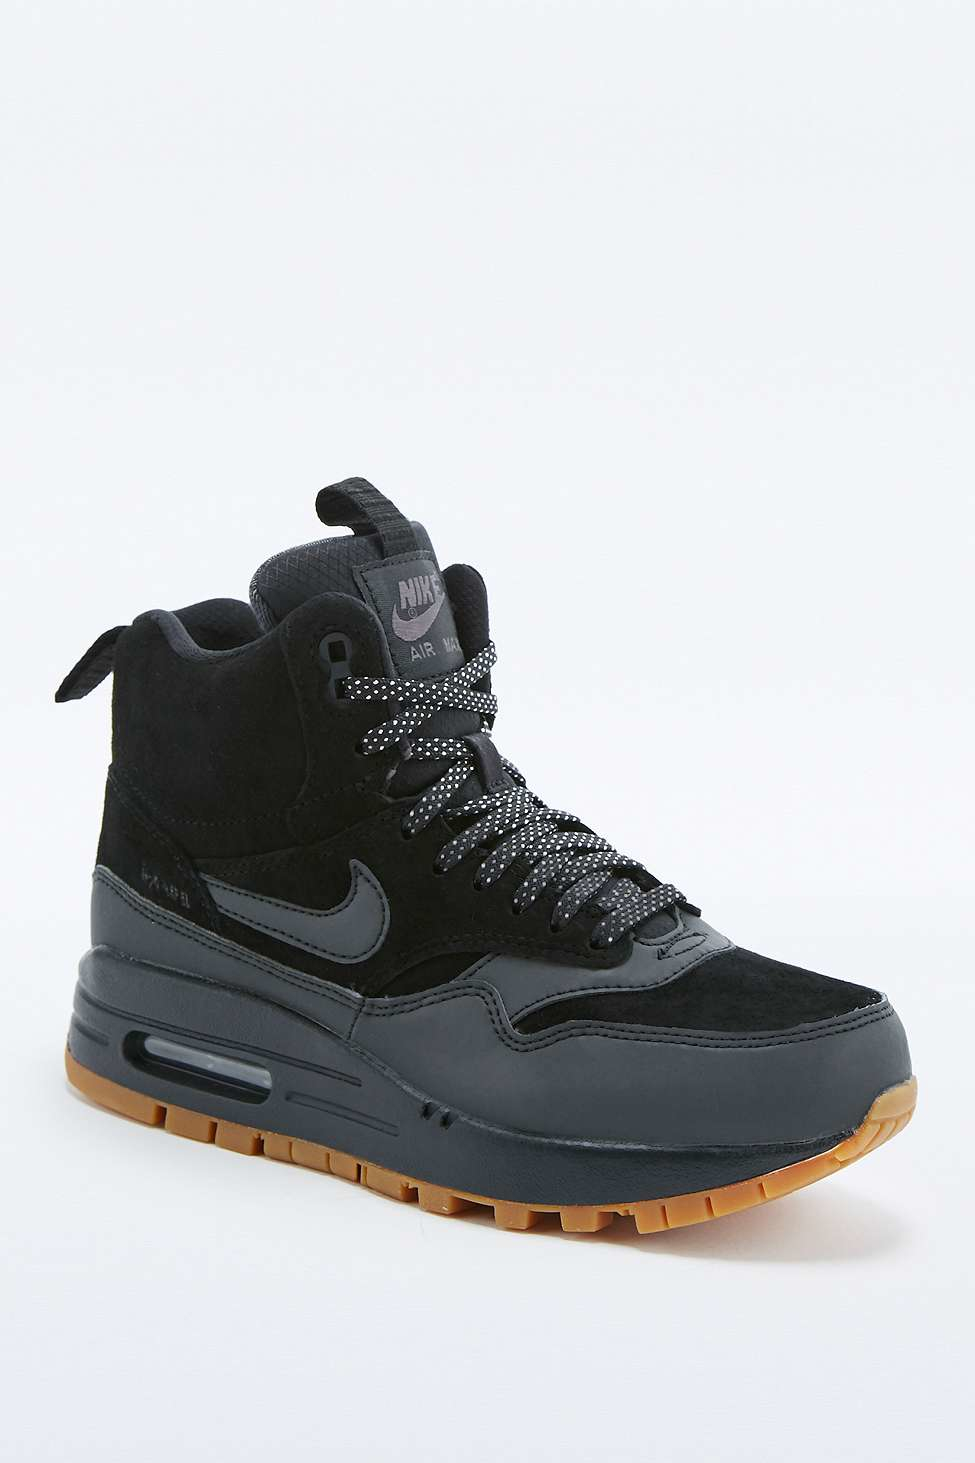 mens nike trainer boots